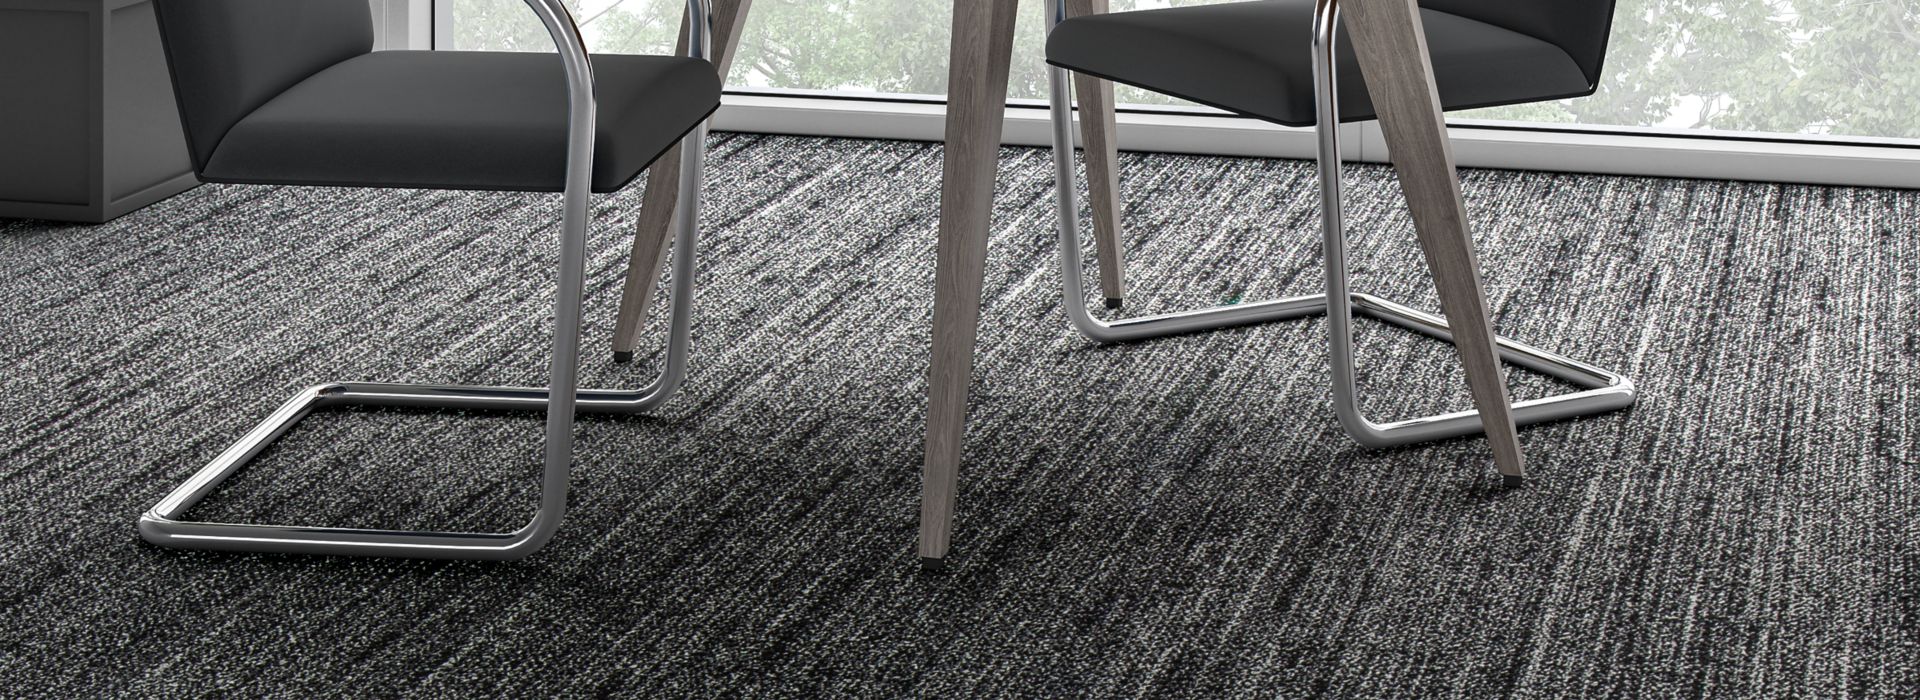 Interface WW870 plank carpet tile shown with small table and chairs